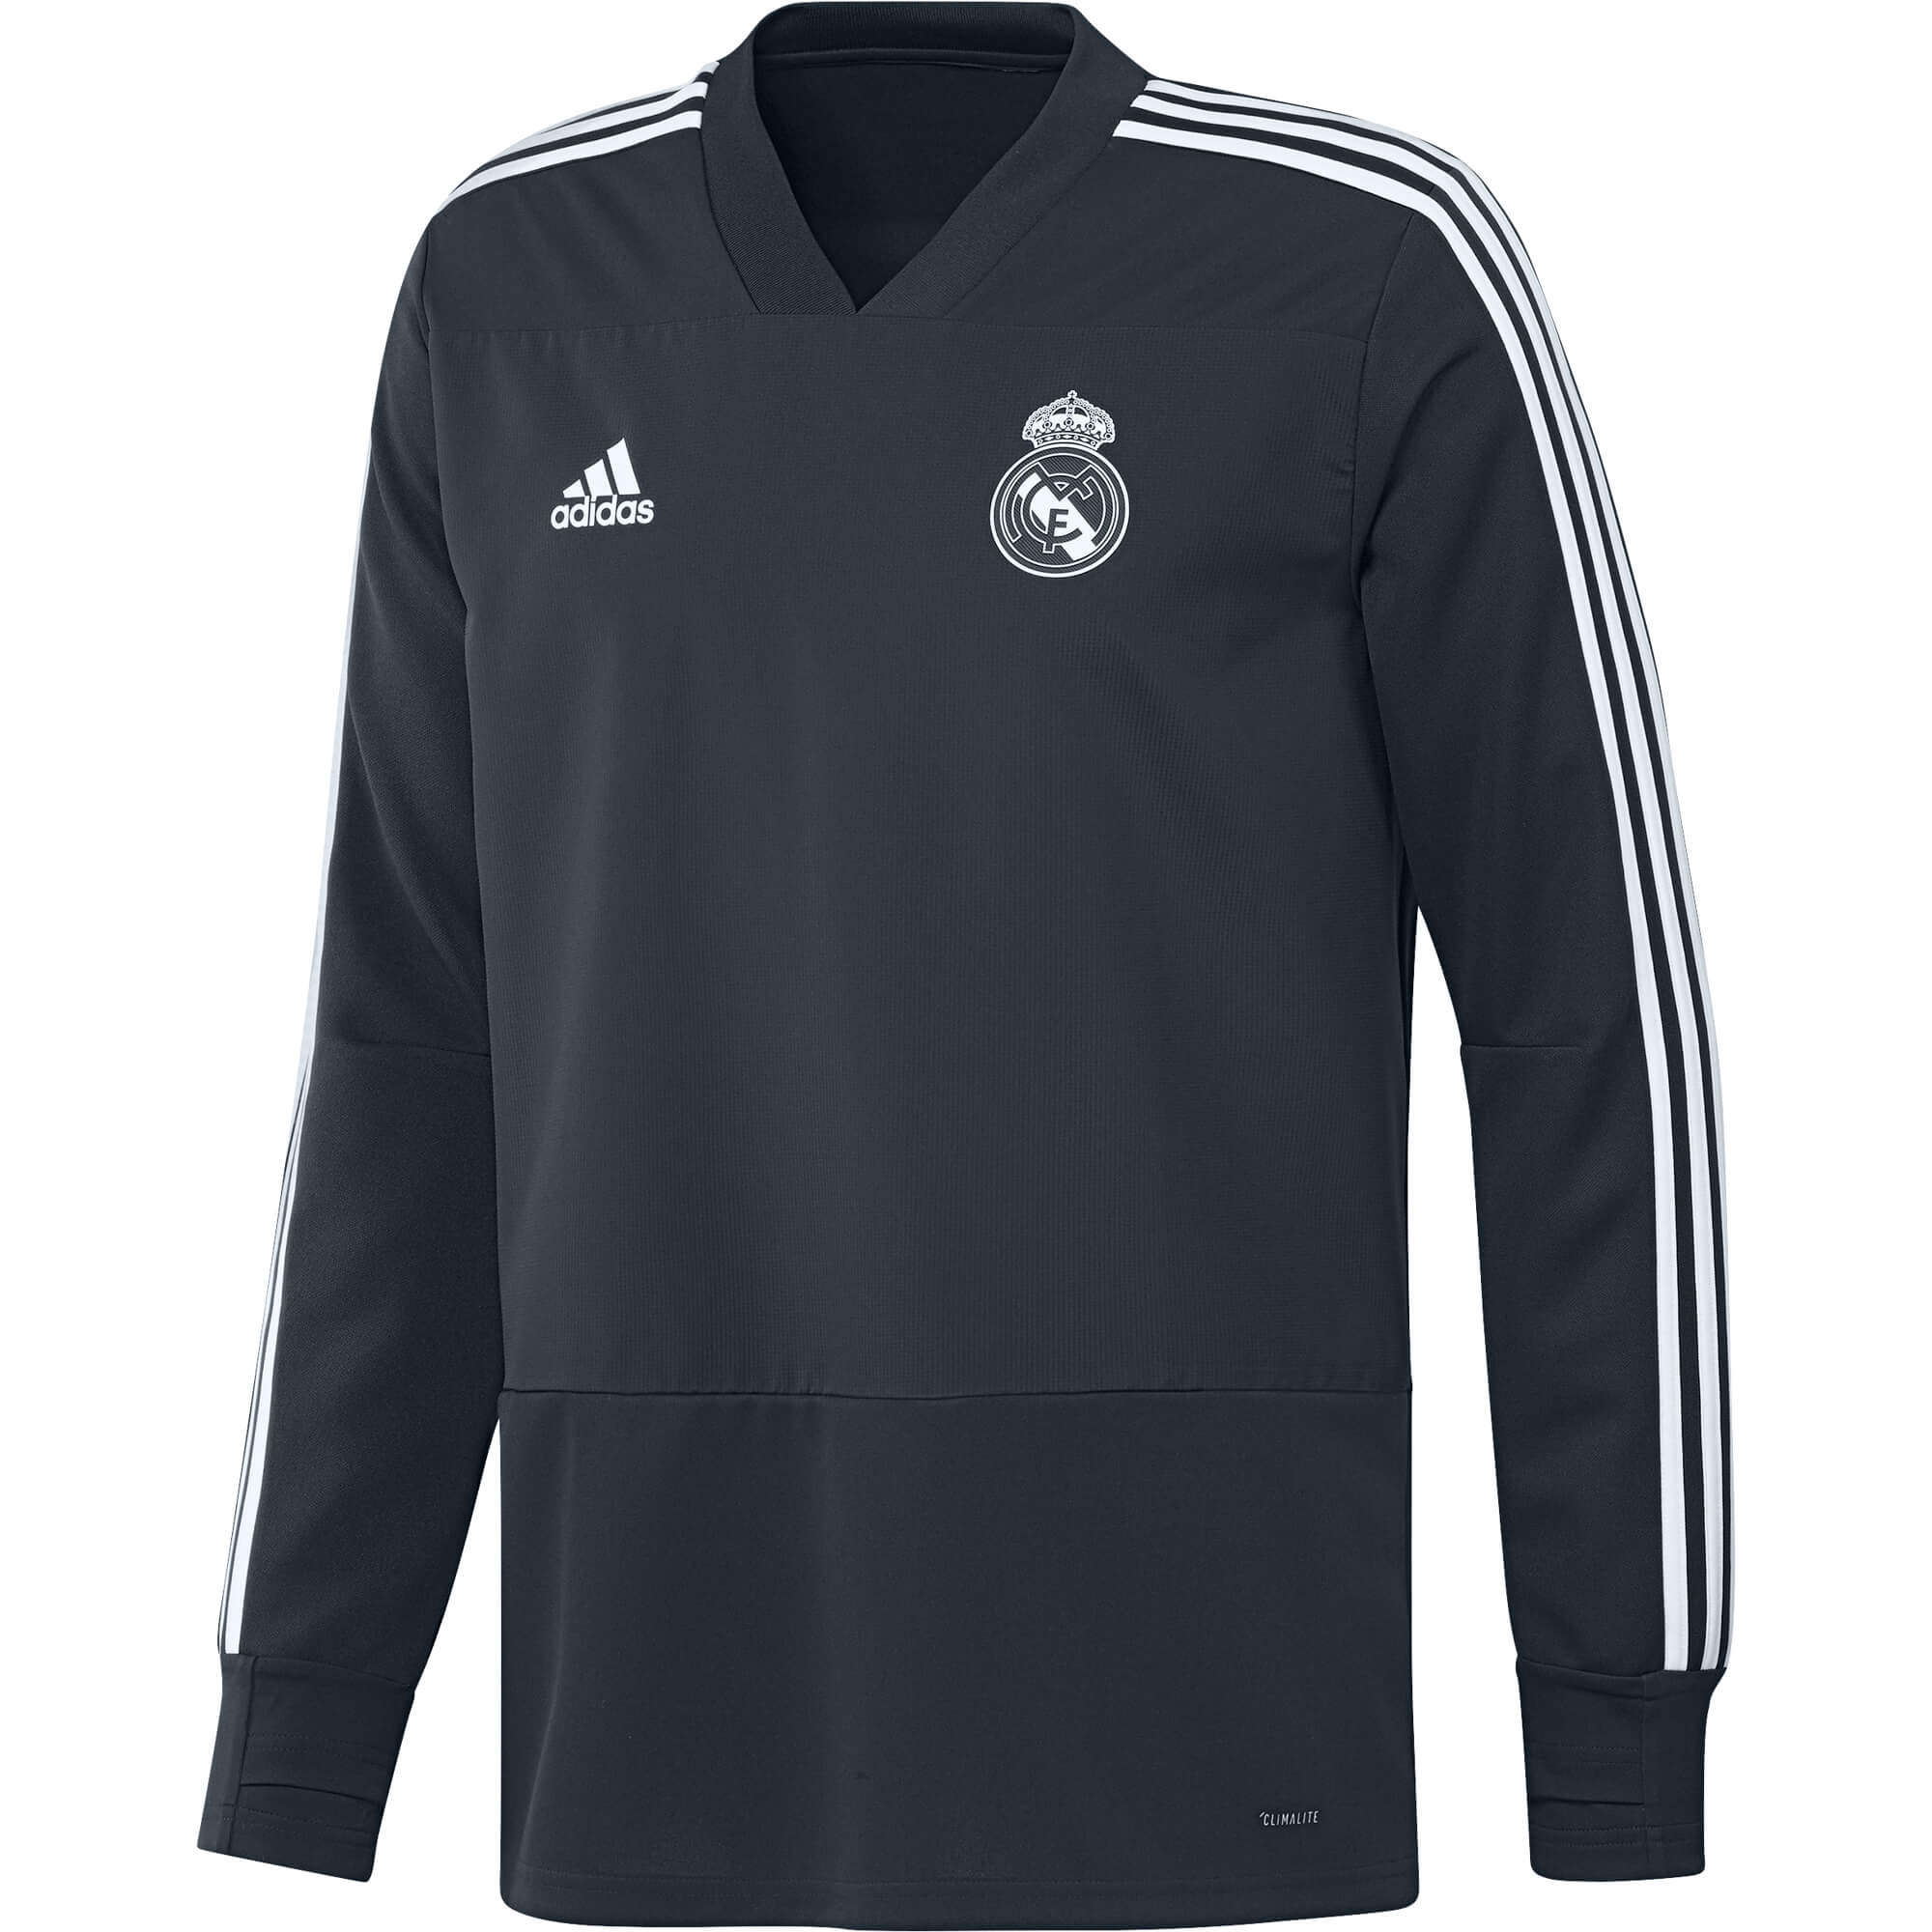 ADIDAS REAL MADRID TRG TOP GRIS 2018/2019